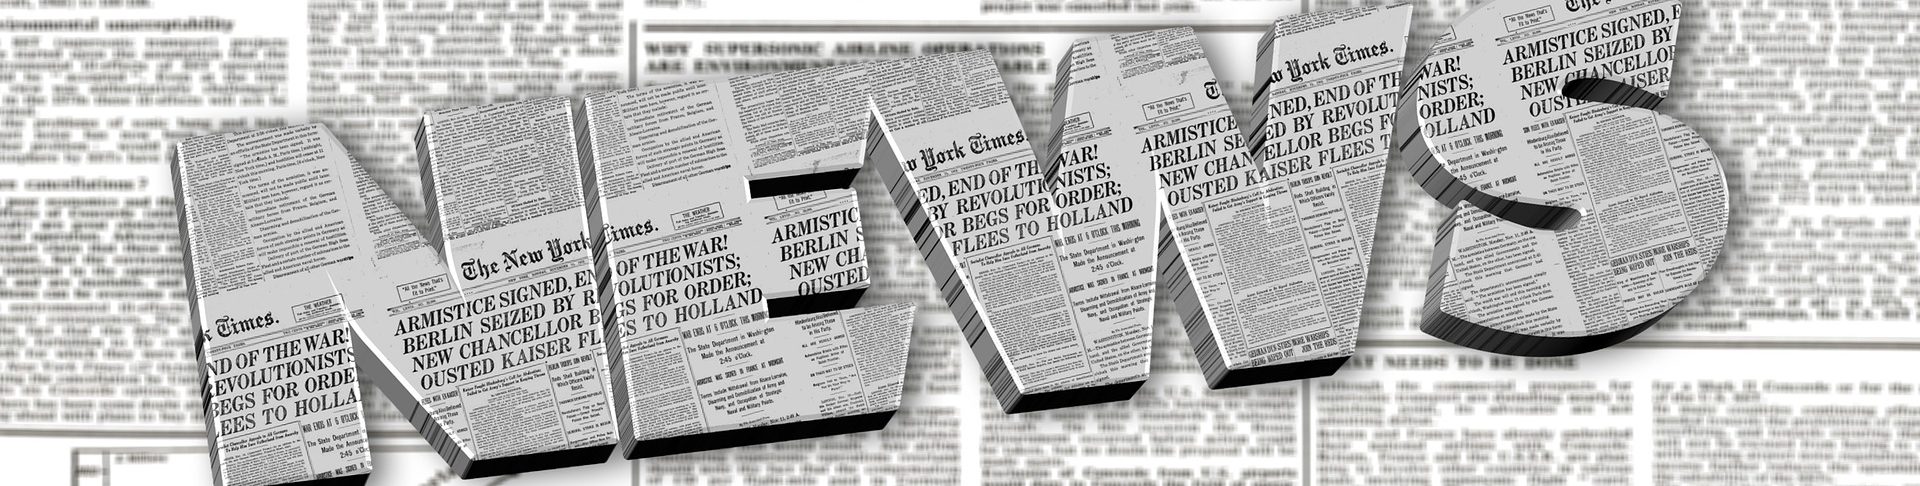 'News' printed over newspaper text